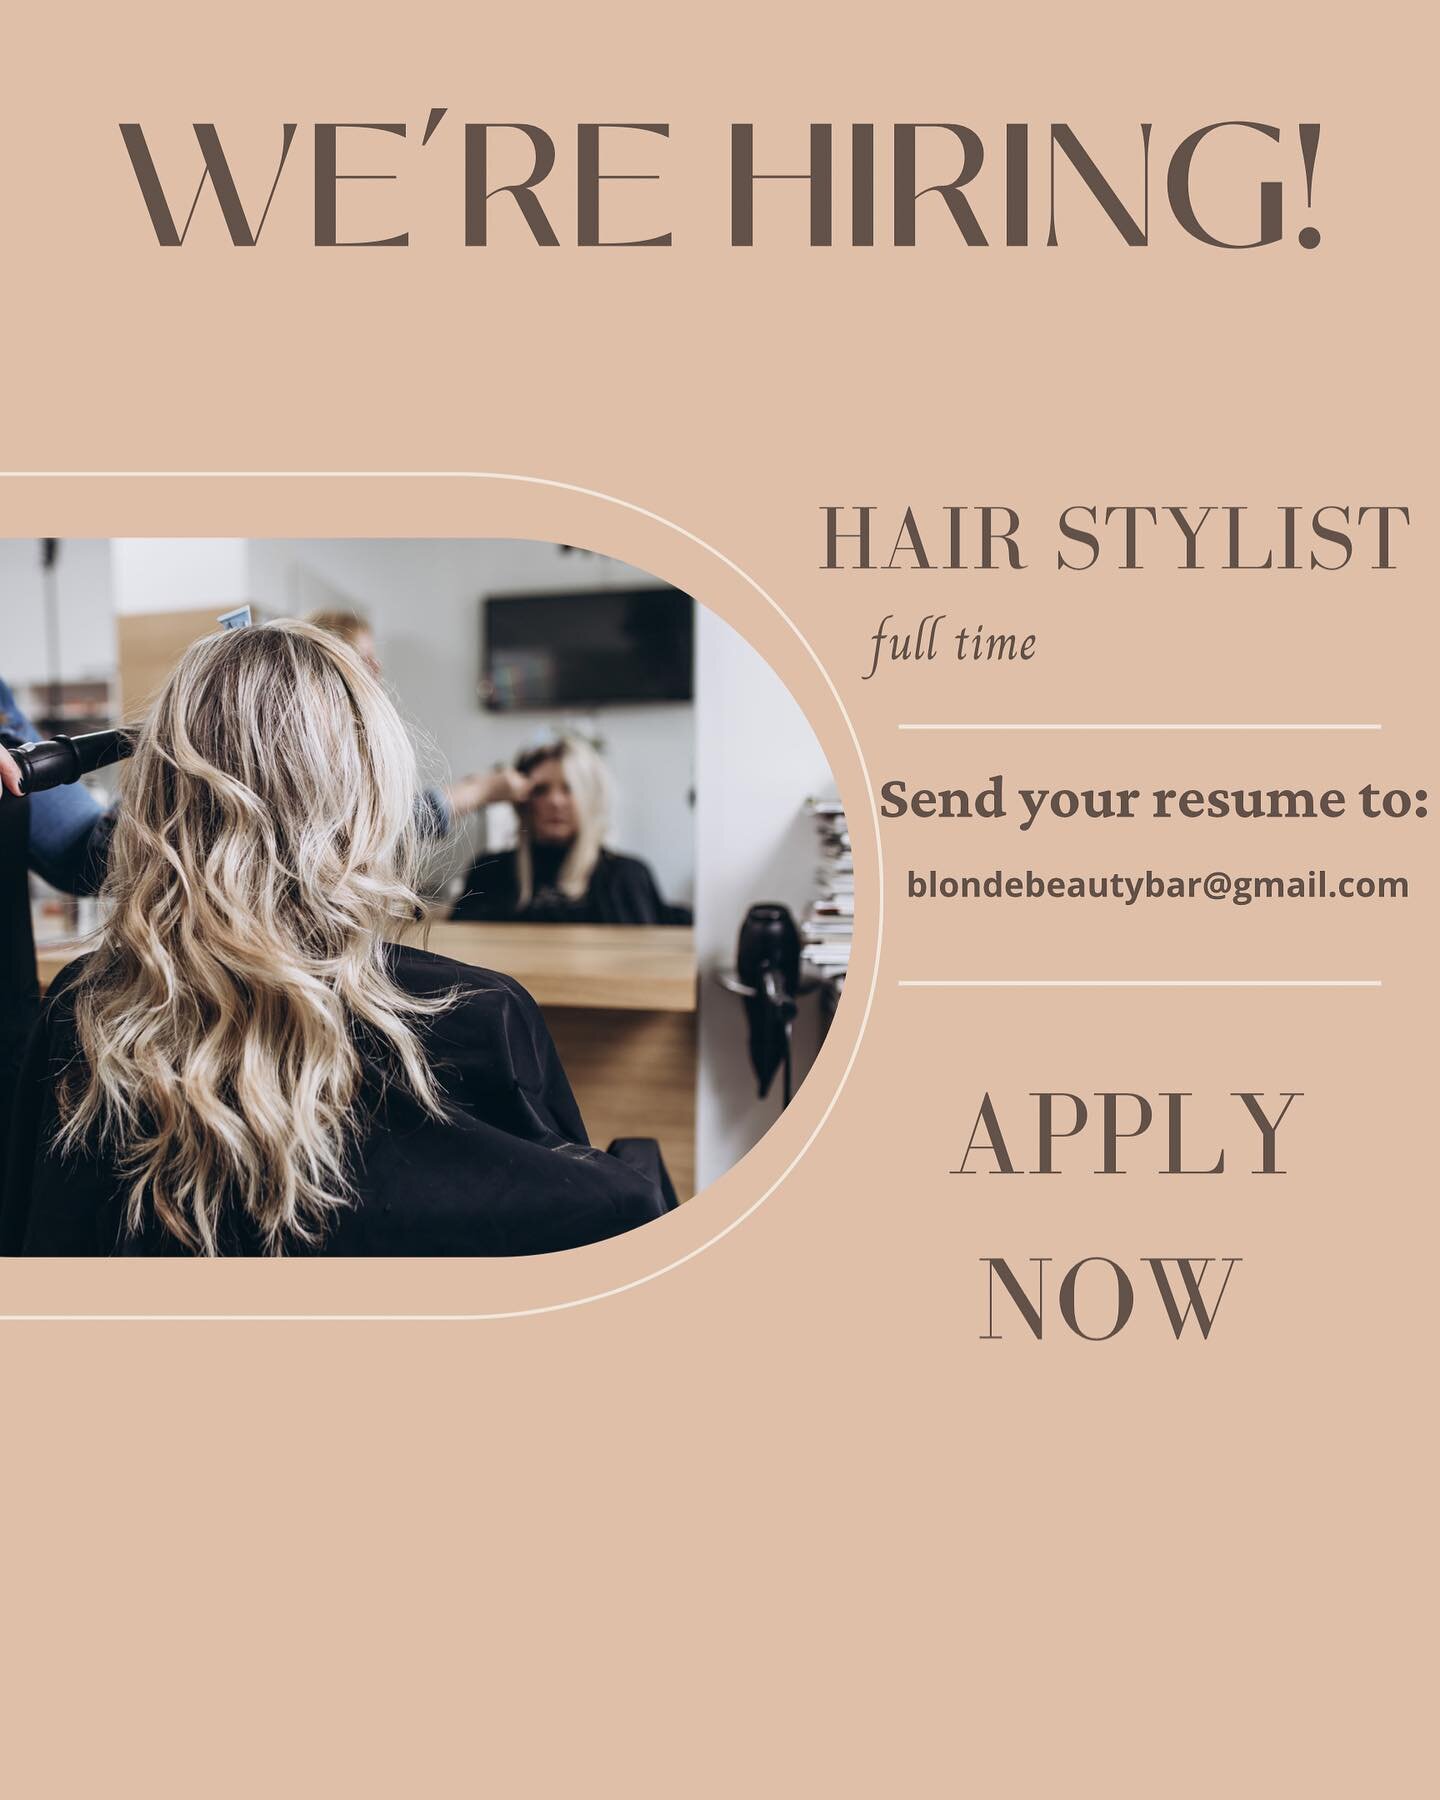 Looking for a new salon home? Email your resume to blondebeautybar@gmail.com or DM us for more info!